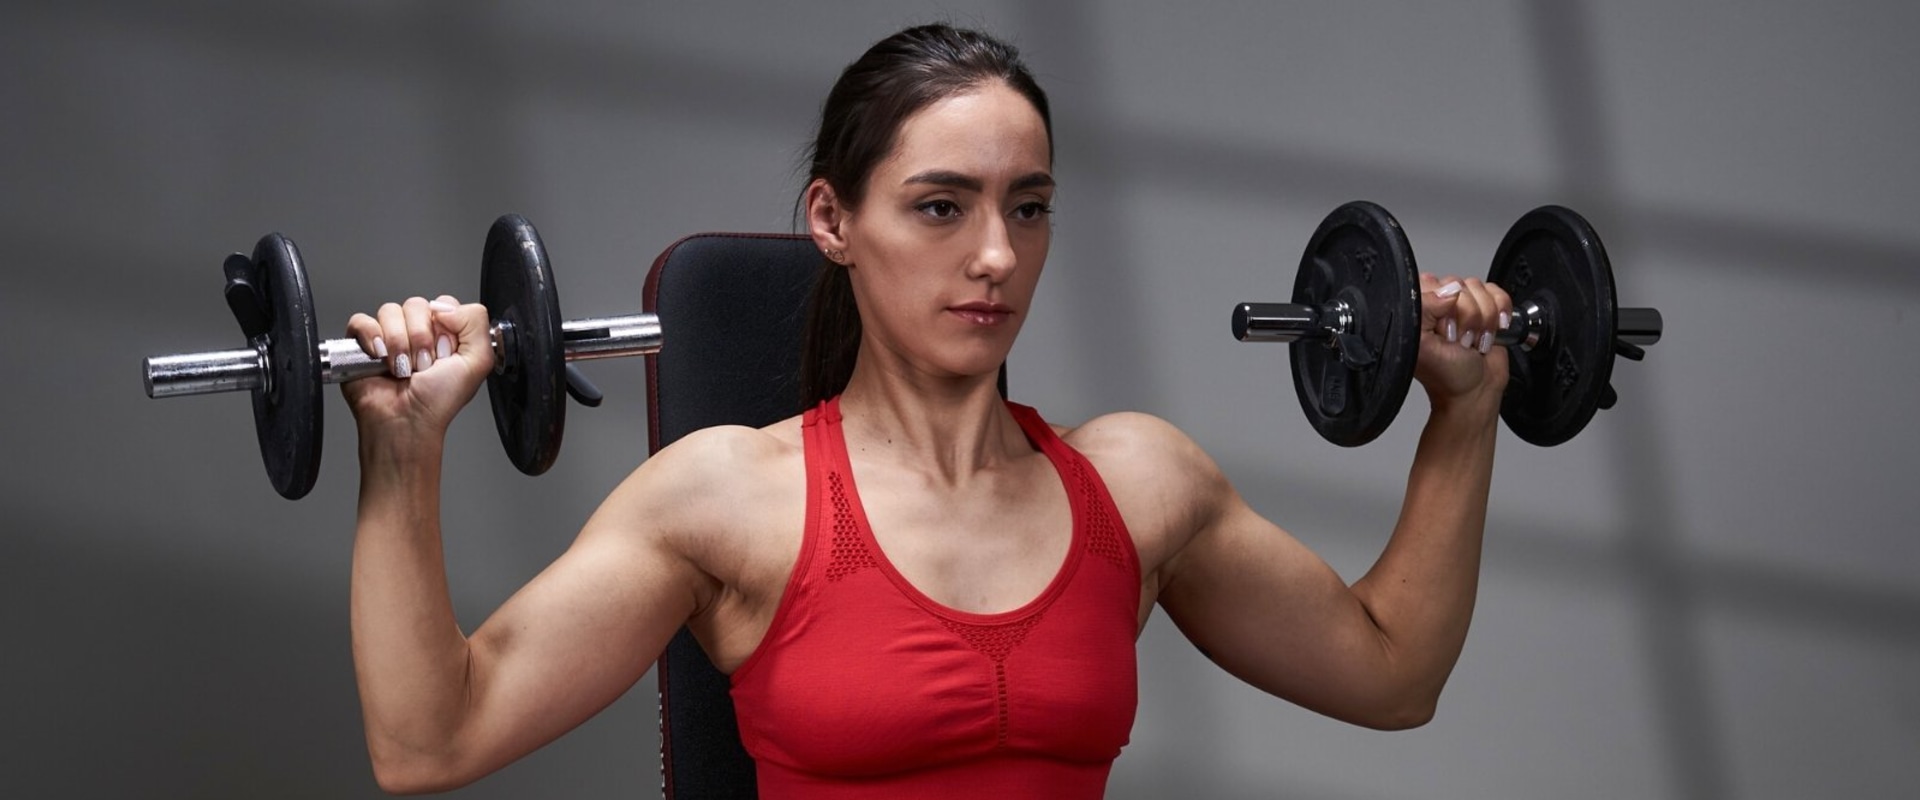 Shoulder Press: An Overview of the Exercise